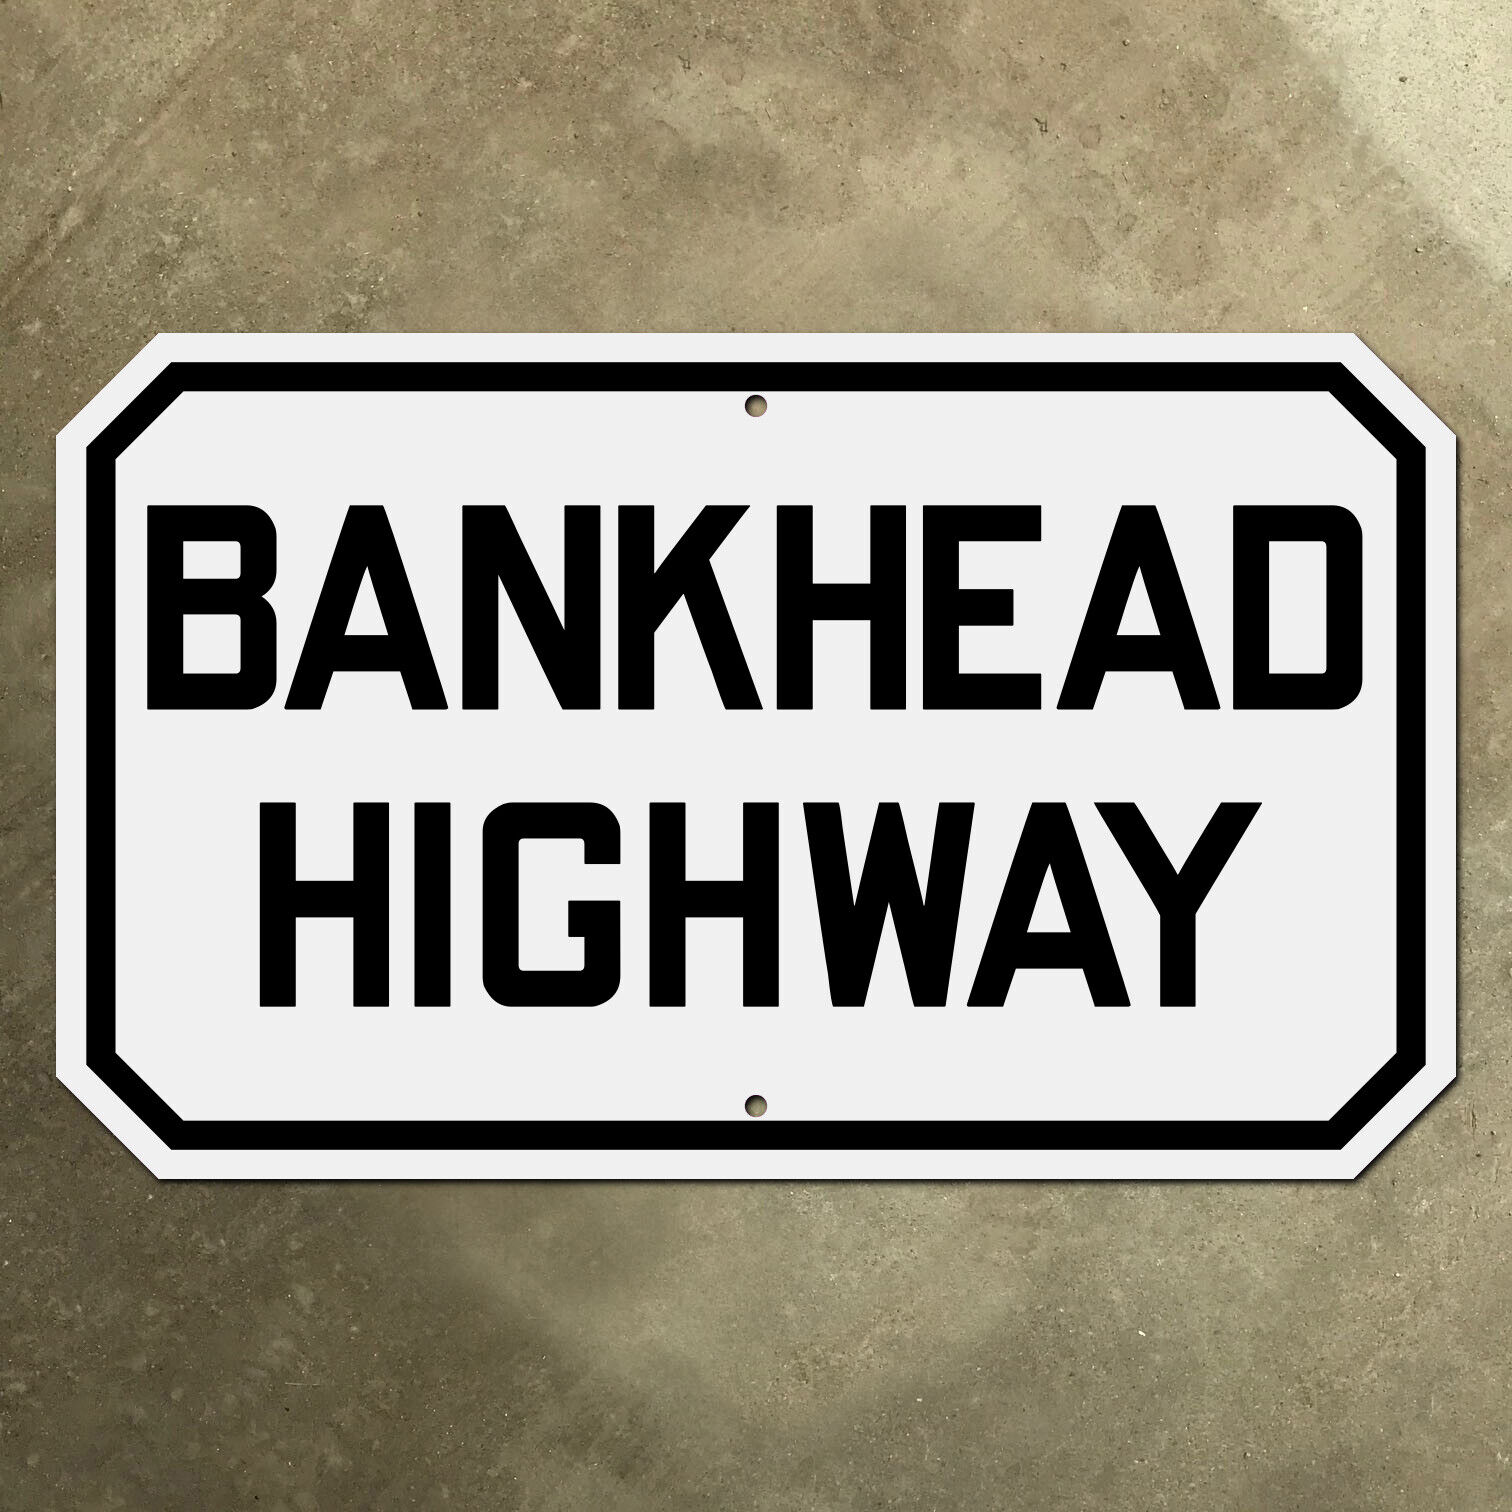 Alabama Bankhead Highway marker road sign 1926 US route 78 24x14